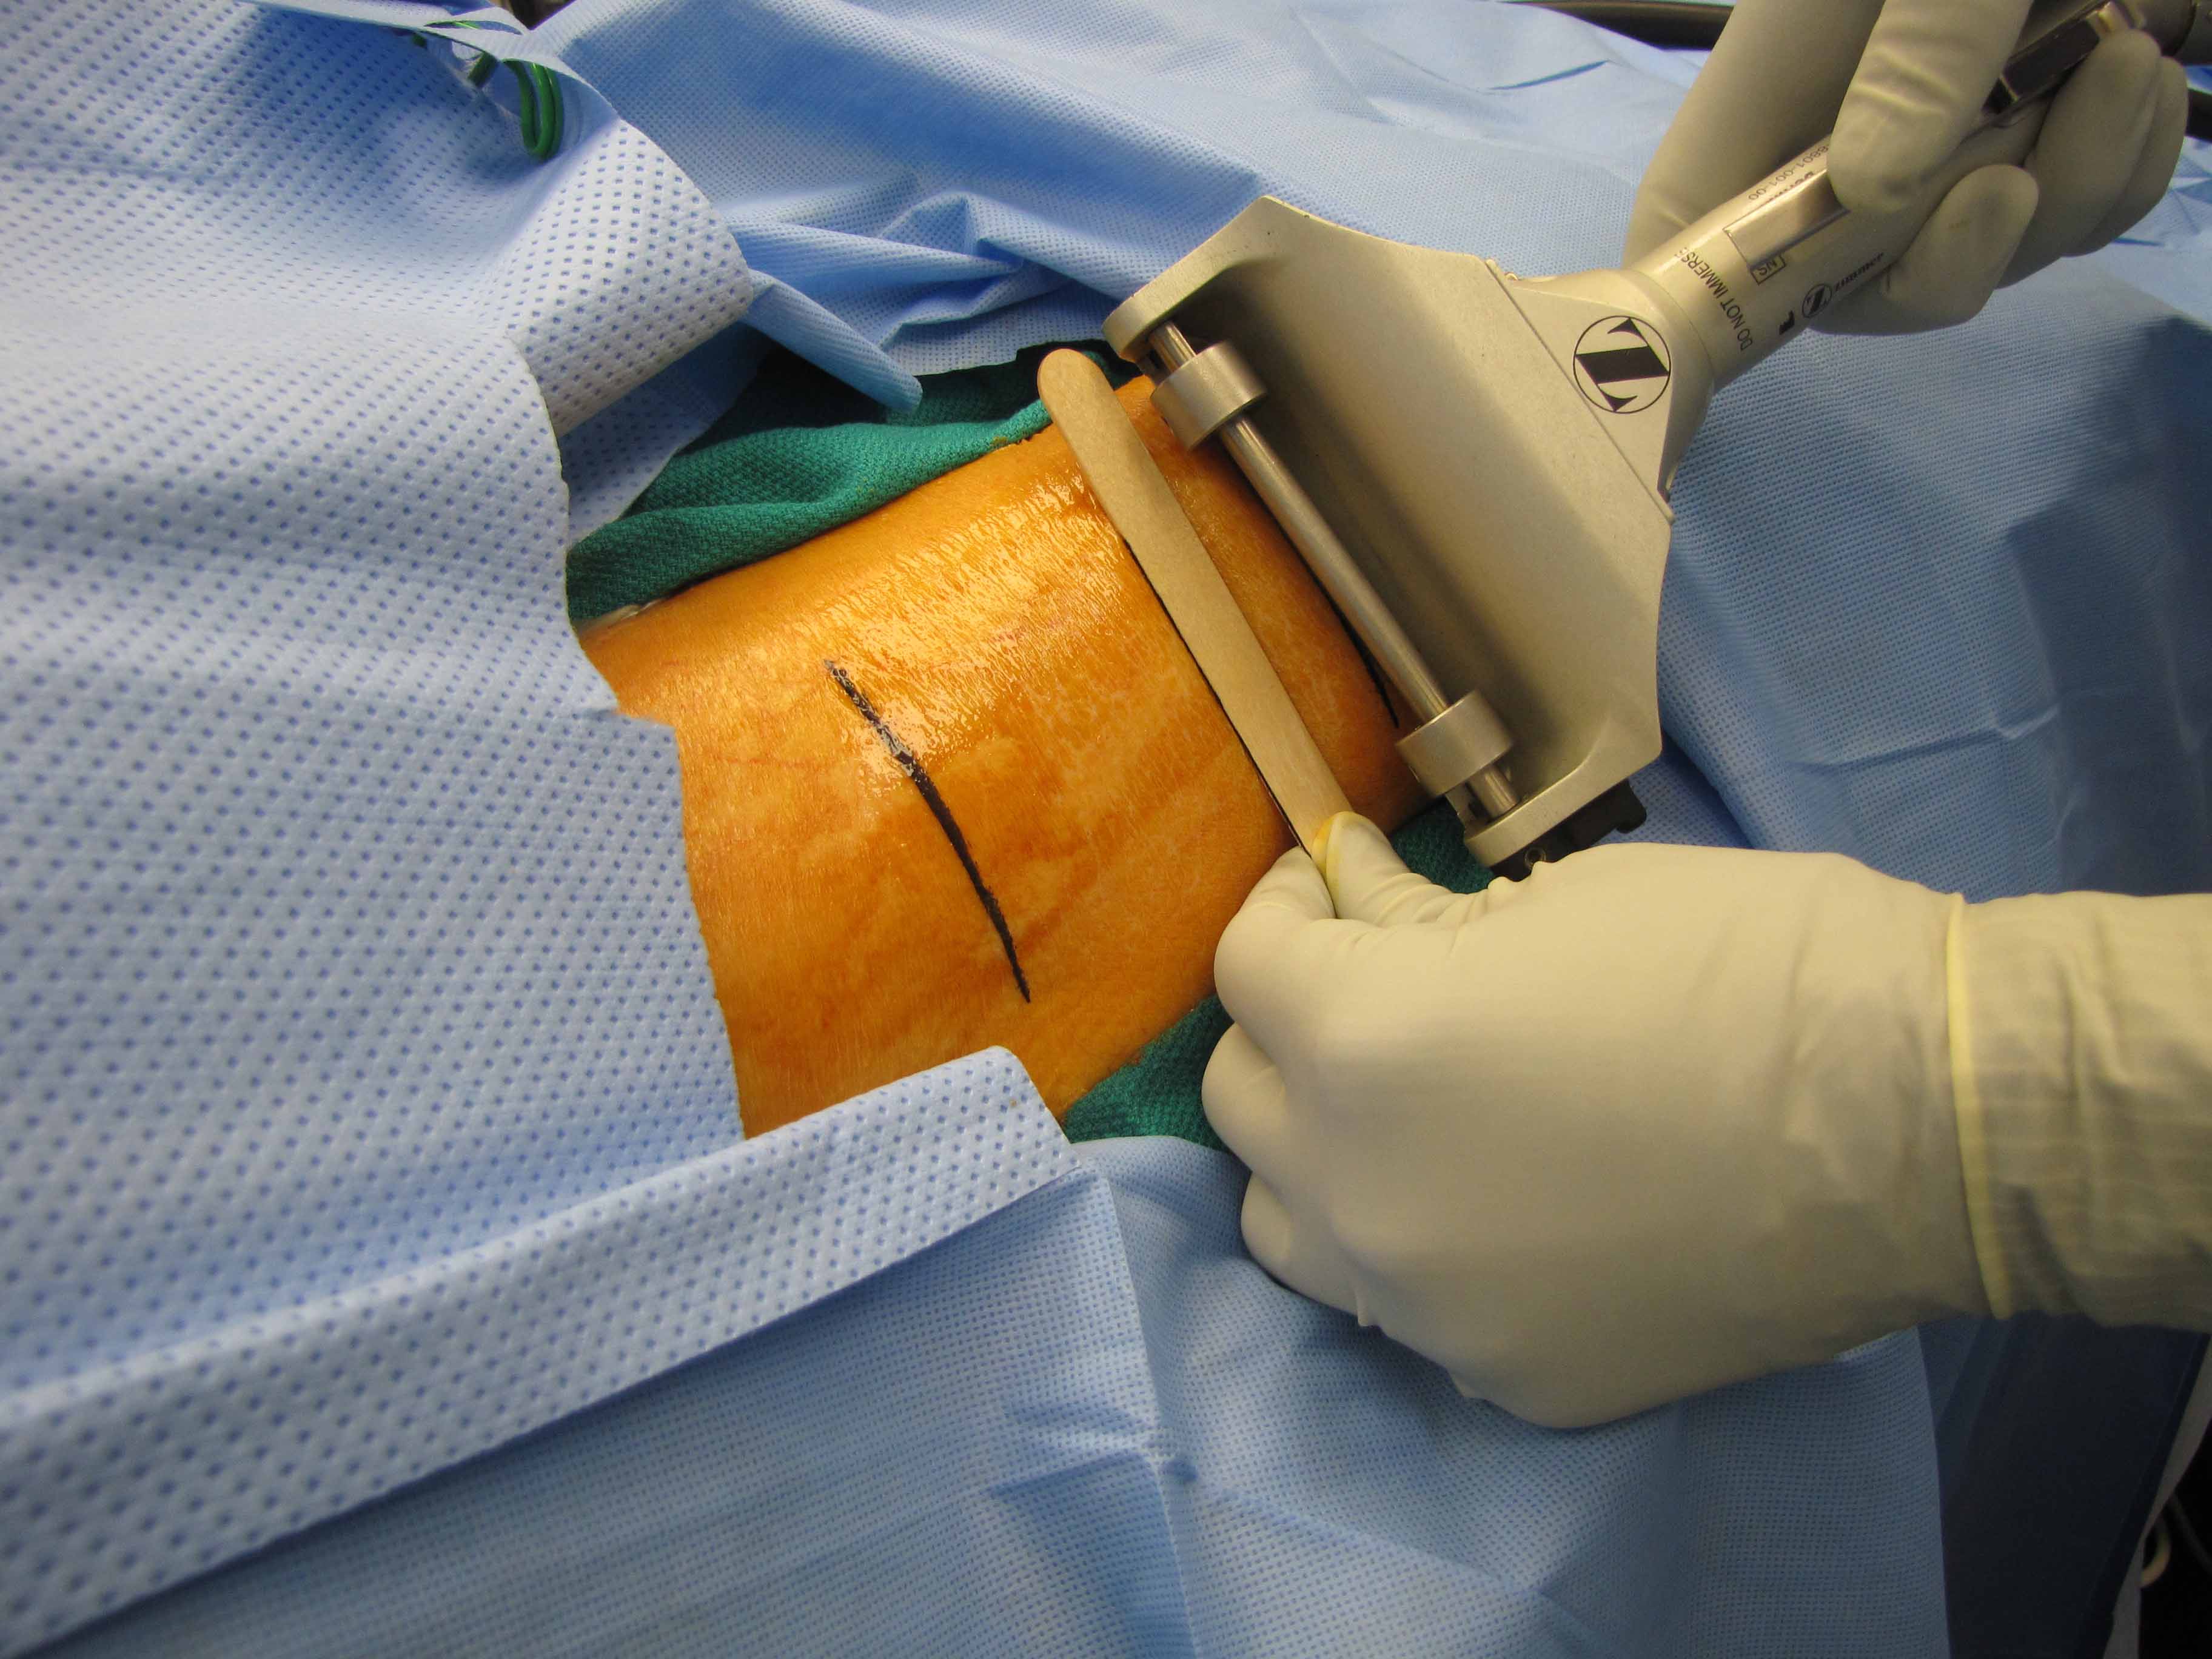 Split Thickness Skin Graft Stsg Zimmer Dermatome Settings With Video